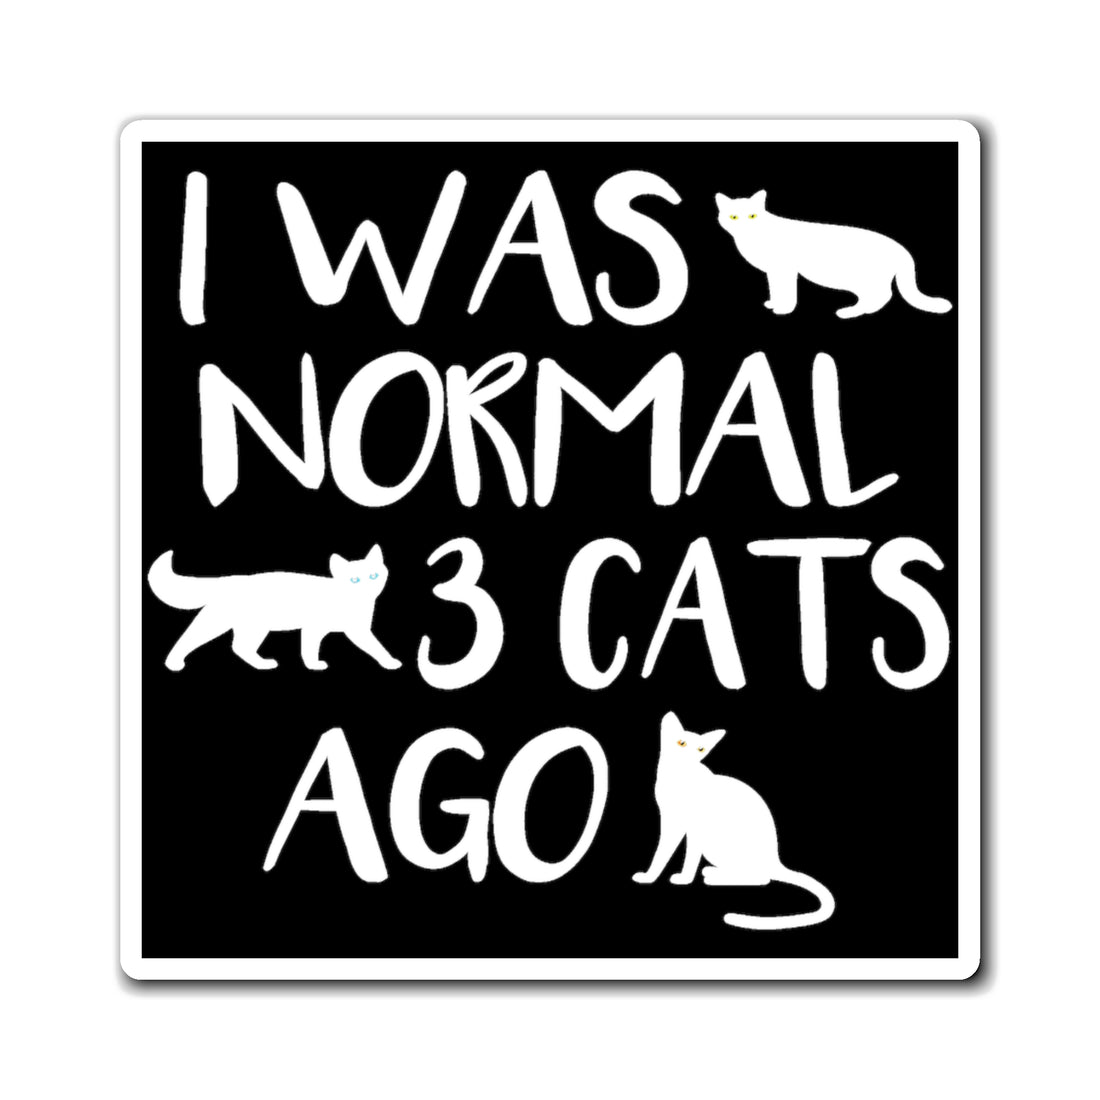 I Was Normal 3 Cats Ago - Magnet